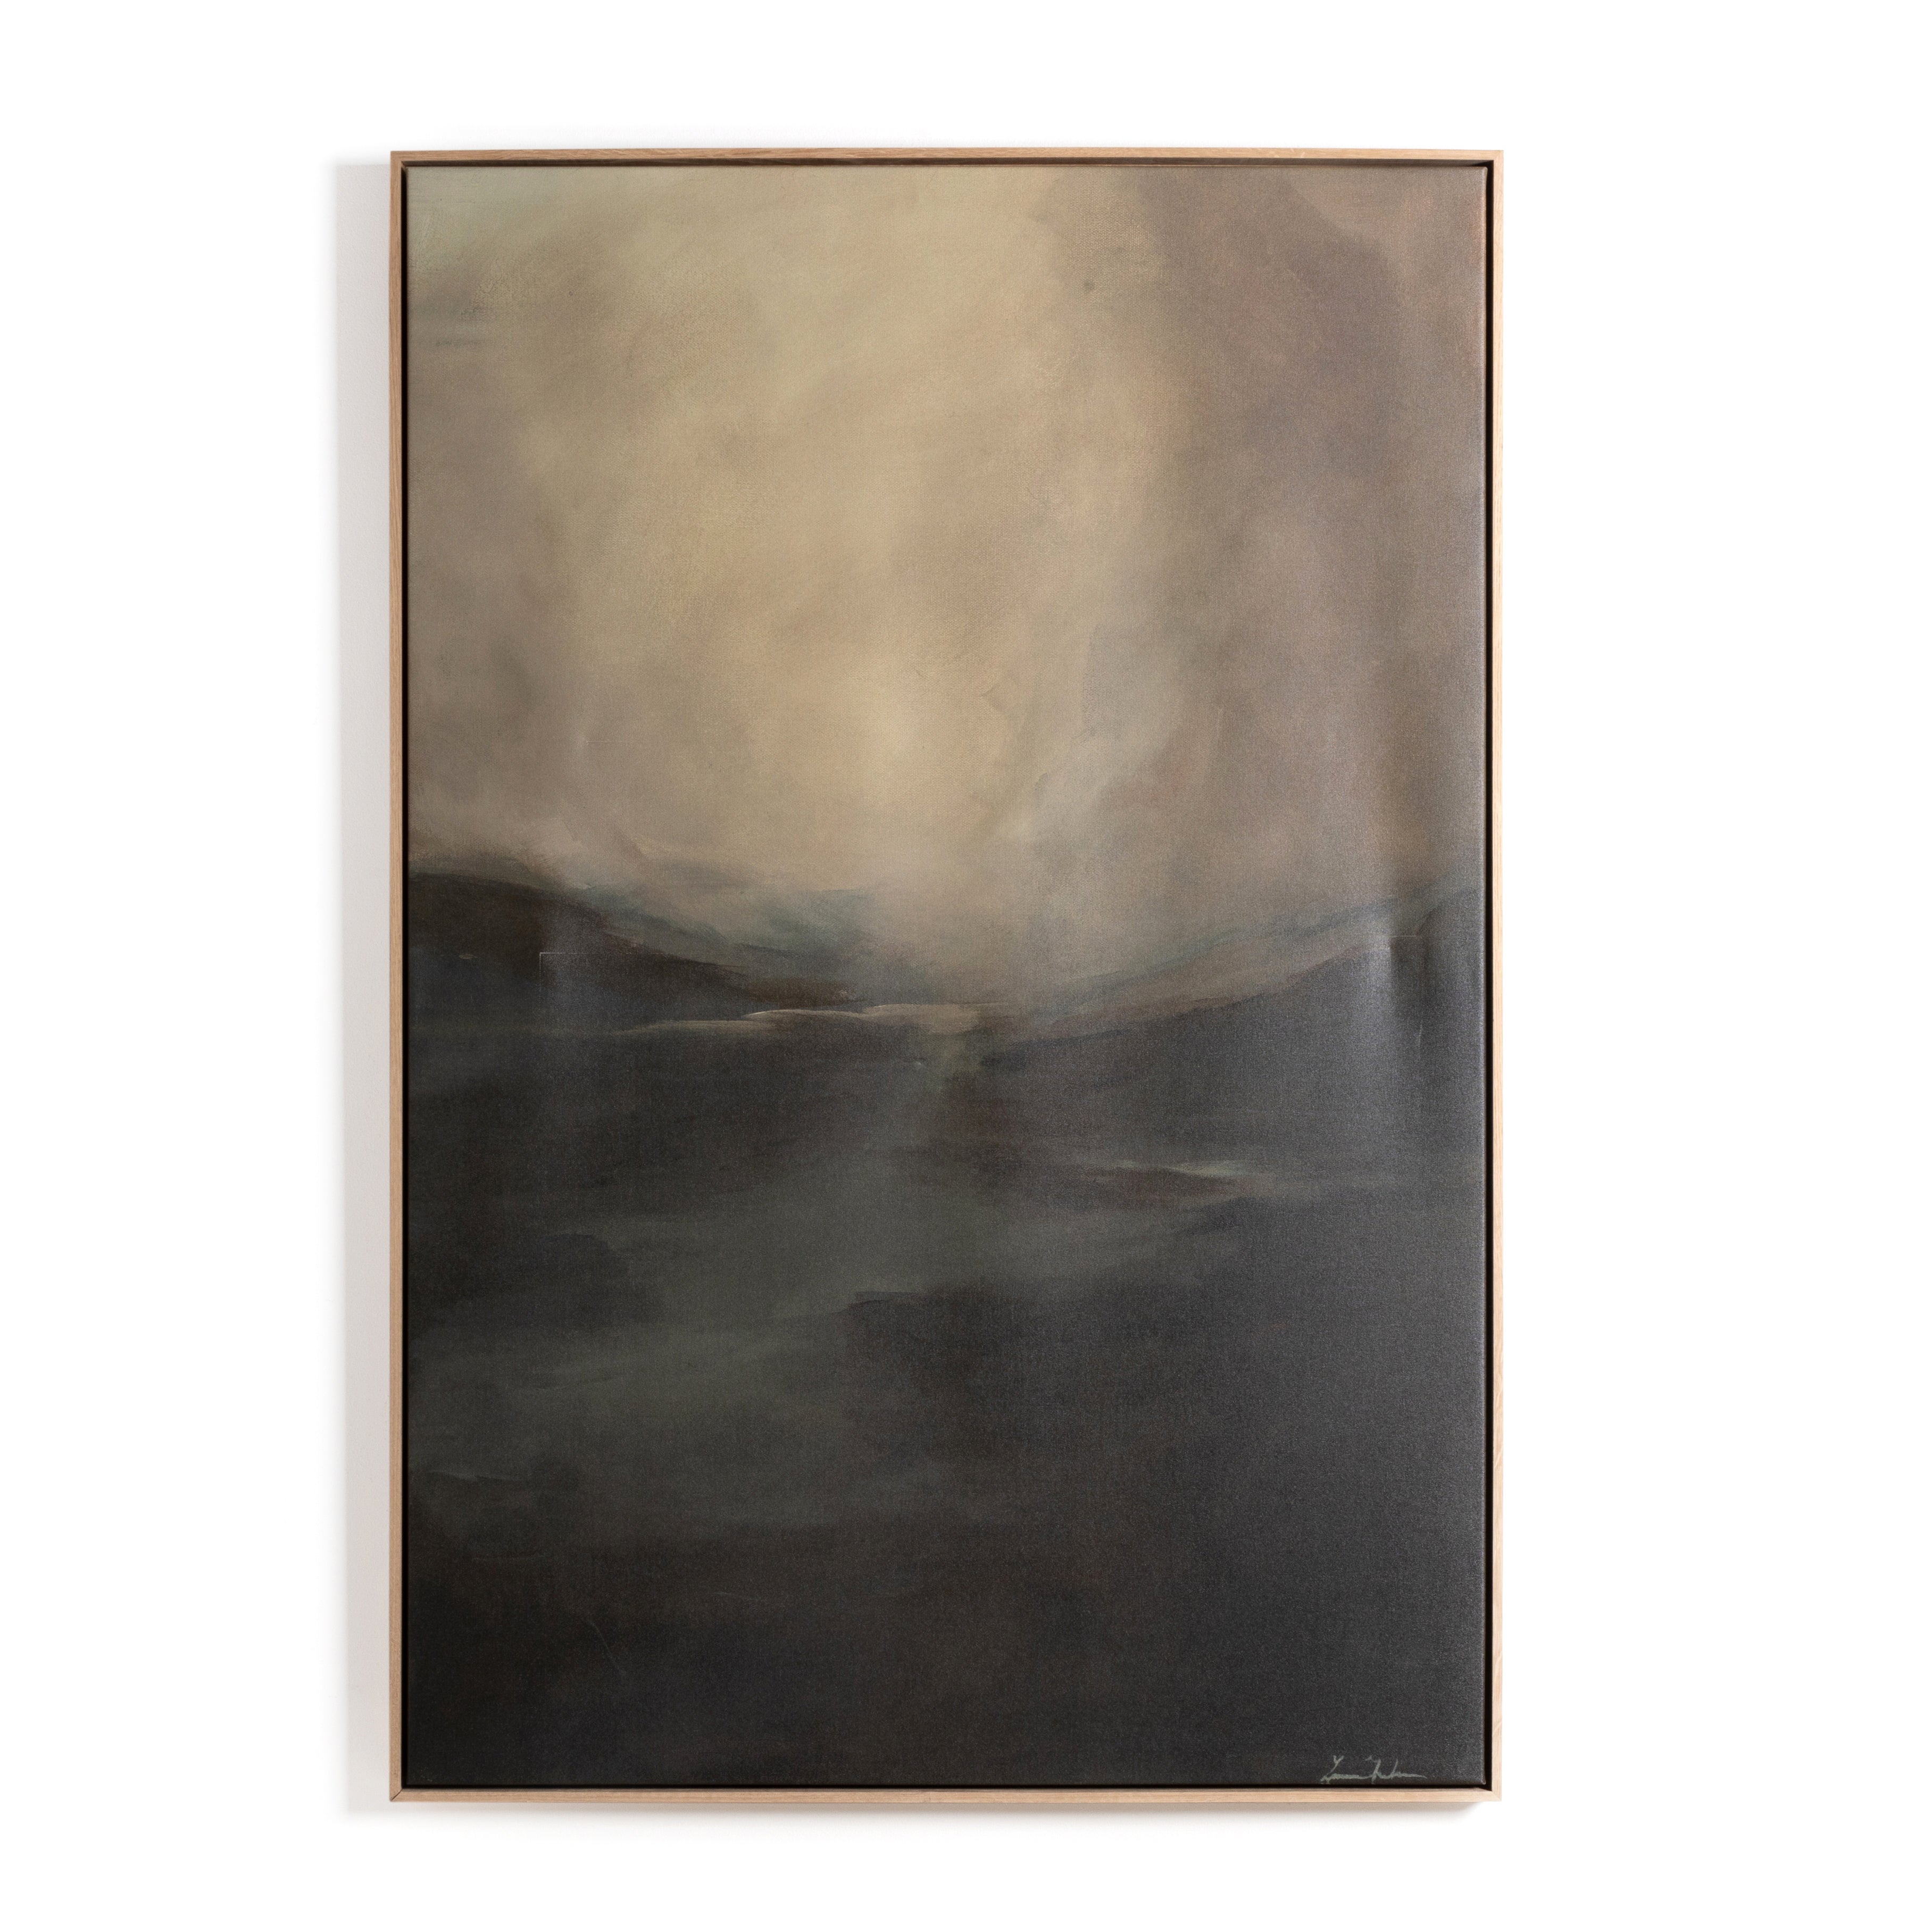 Inspired by nature and the beauty of ordinary life, Dallas-based artist Lauren Fuhr captures fog rolling over the hills on matte canvas. Complemented by a vertical grain white oak floater frame. Amethyst Home provides interior design, new home construction design consulting, vintage area rugs, and lighting in the Scottsdale metro area.